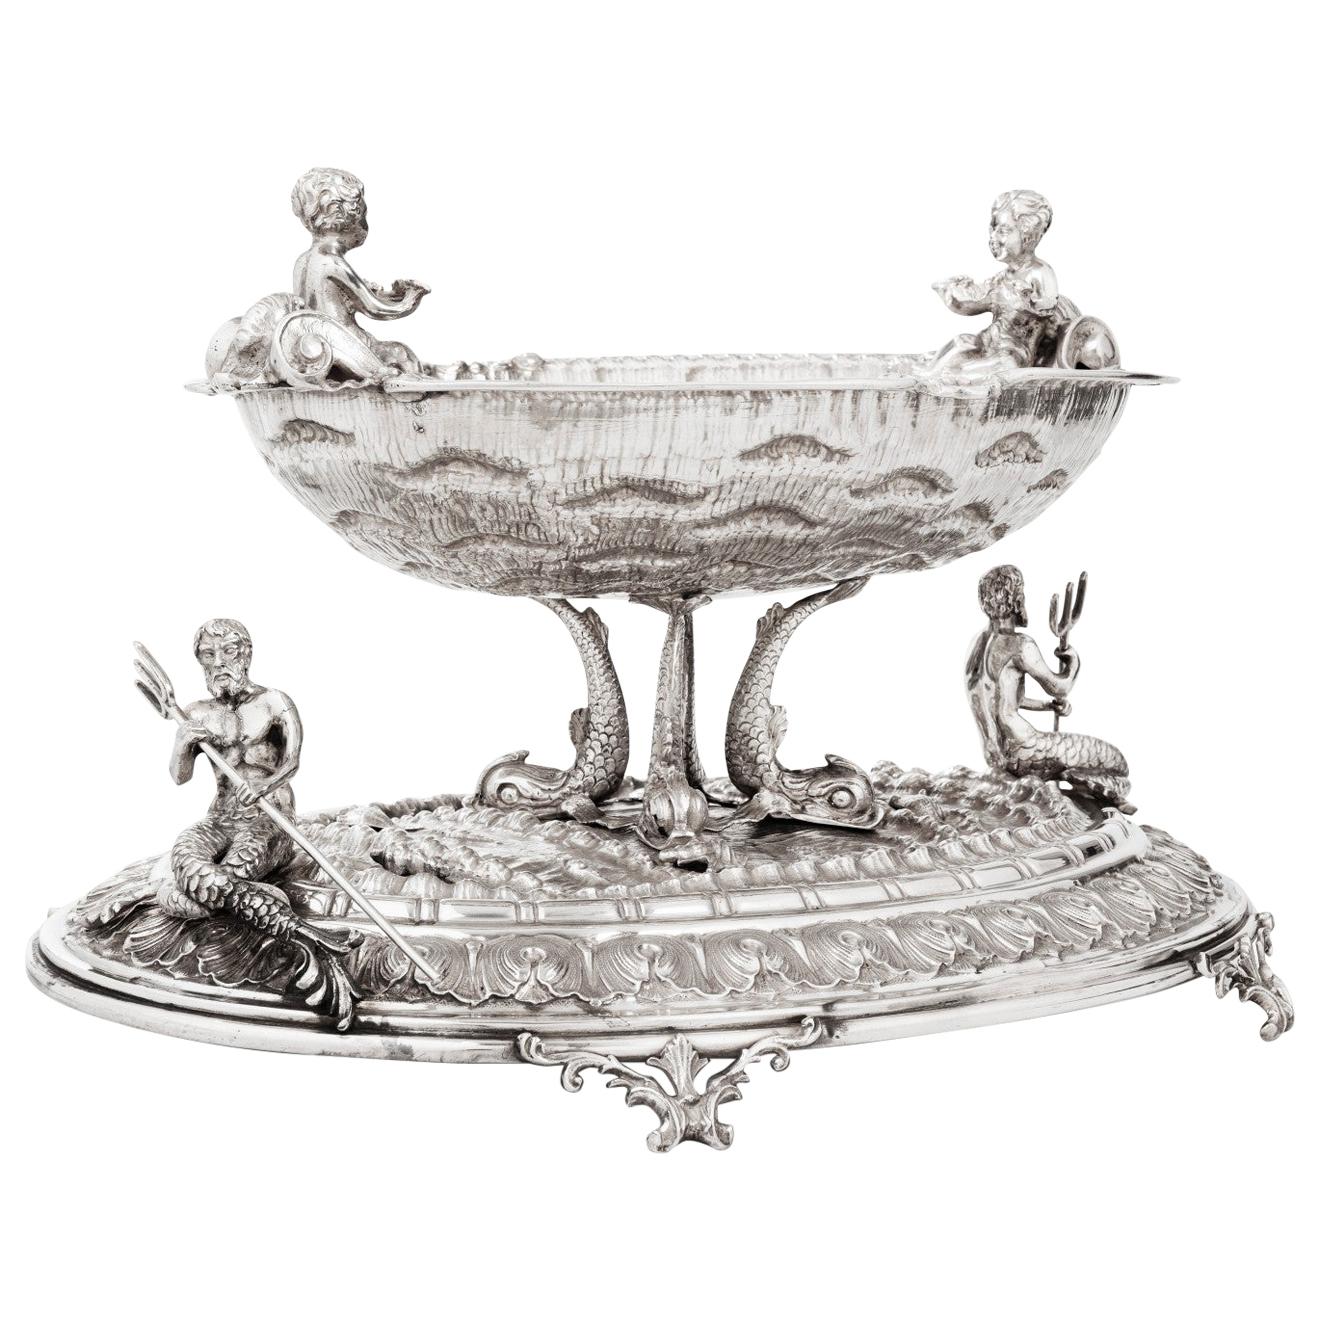 Exceptional Nautical Themed Silver Centerpiece by Buccellati For Sale